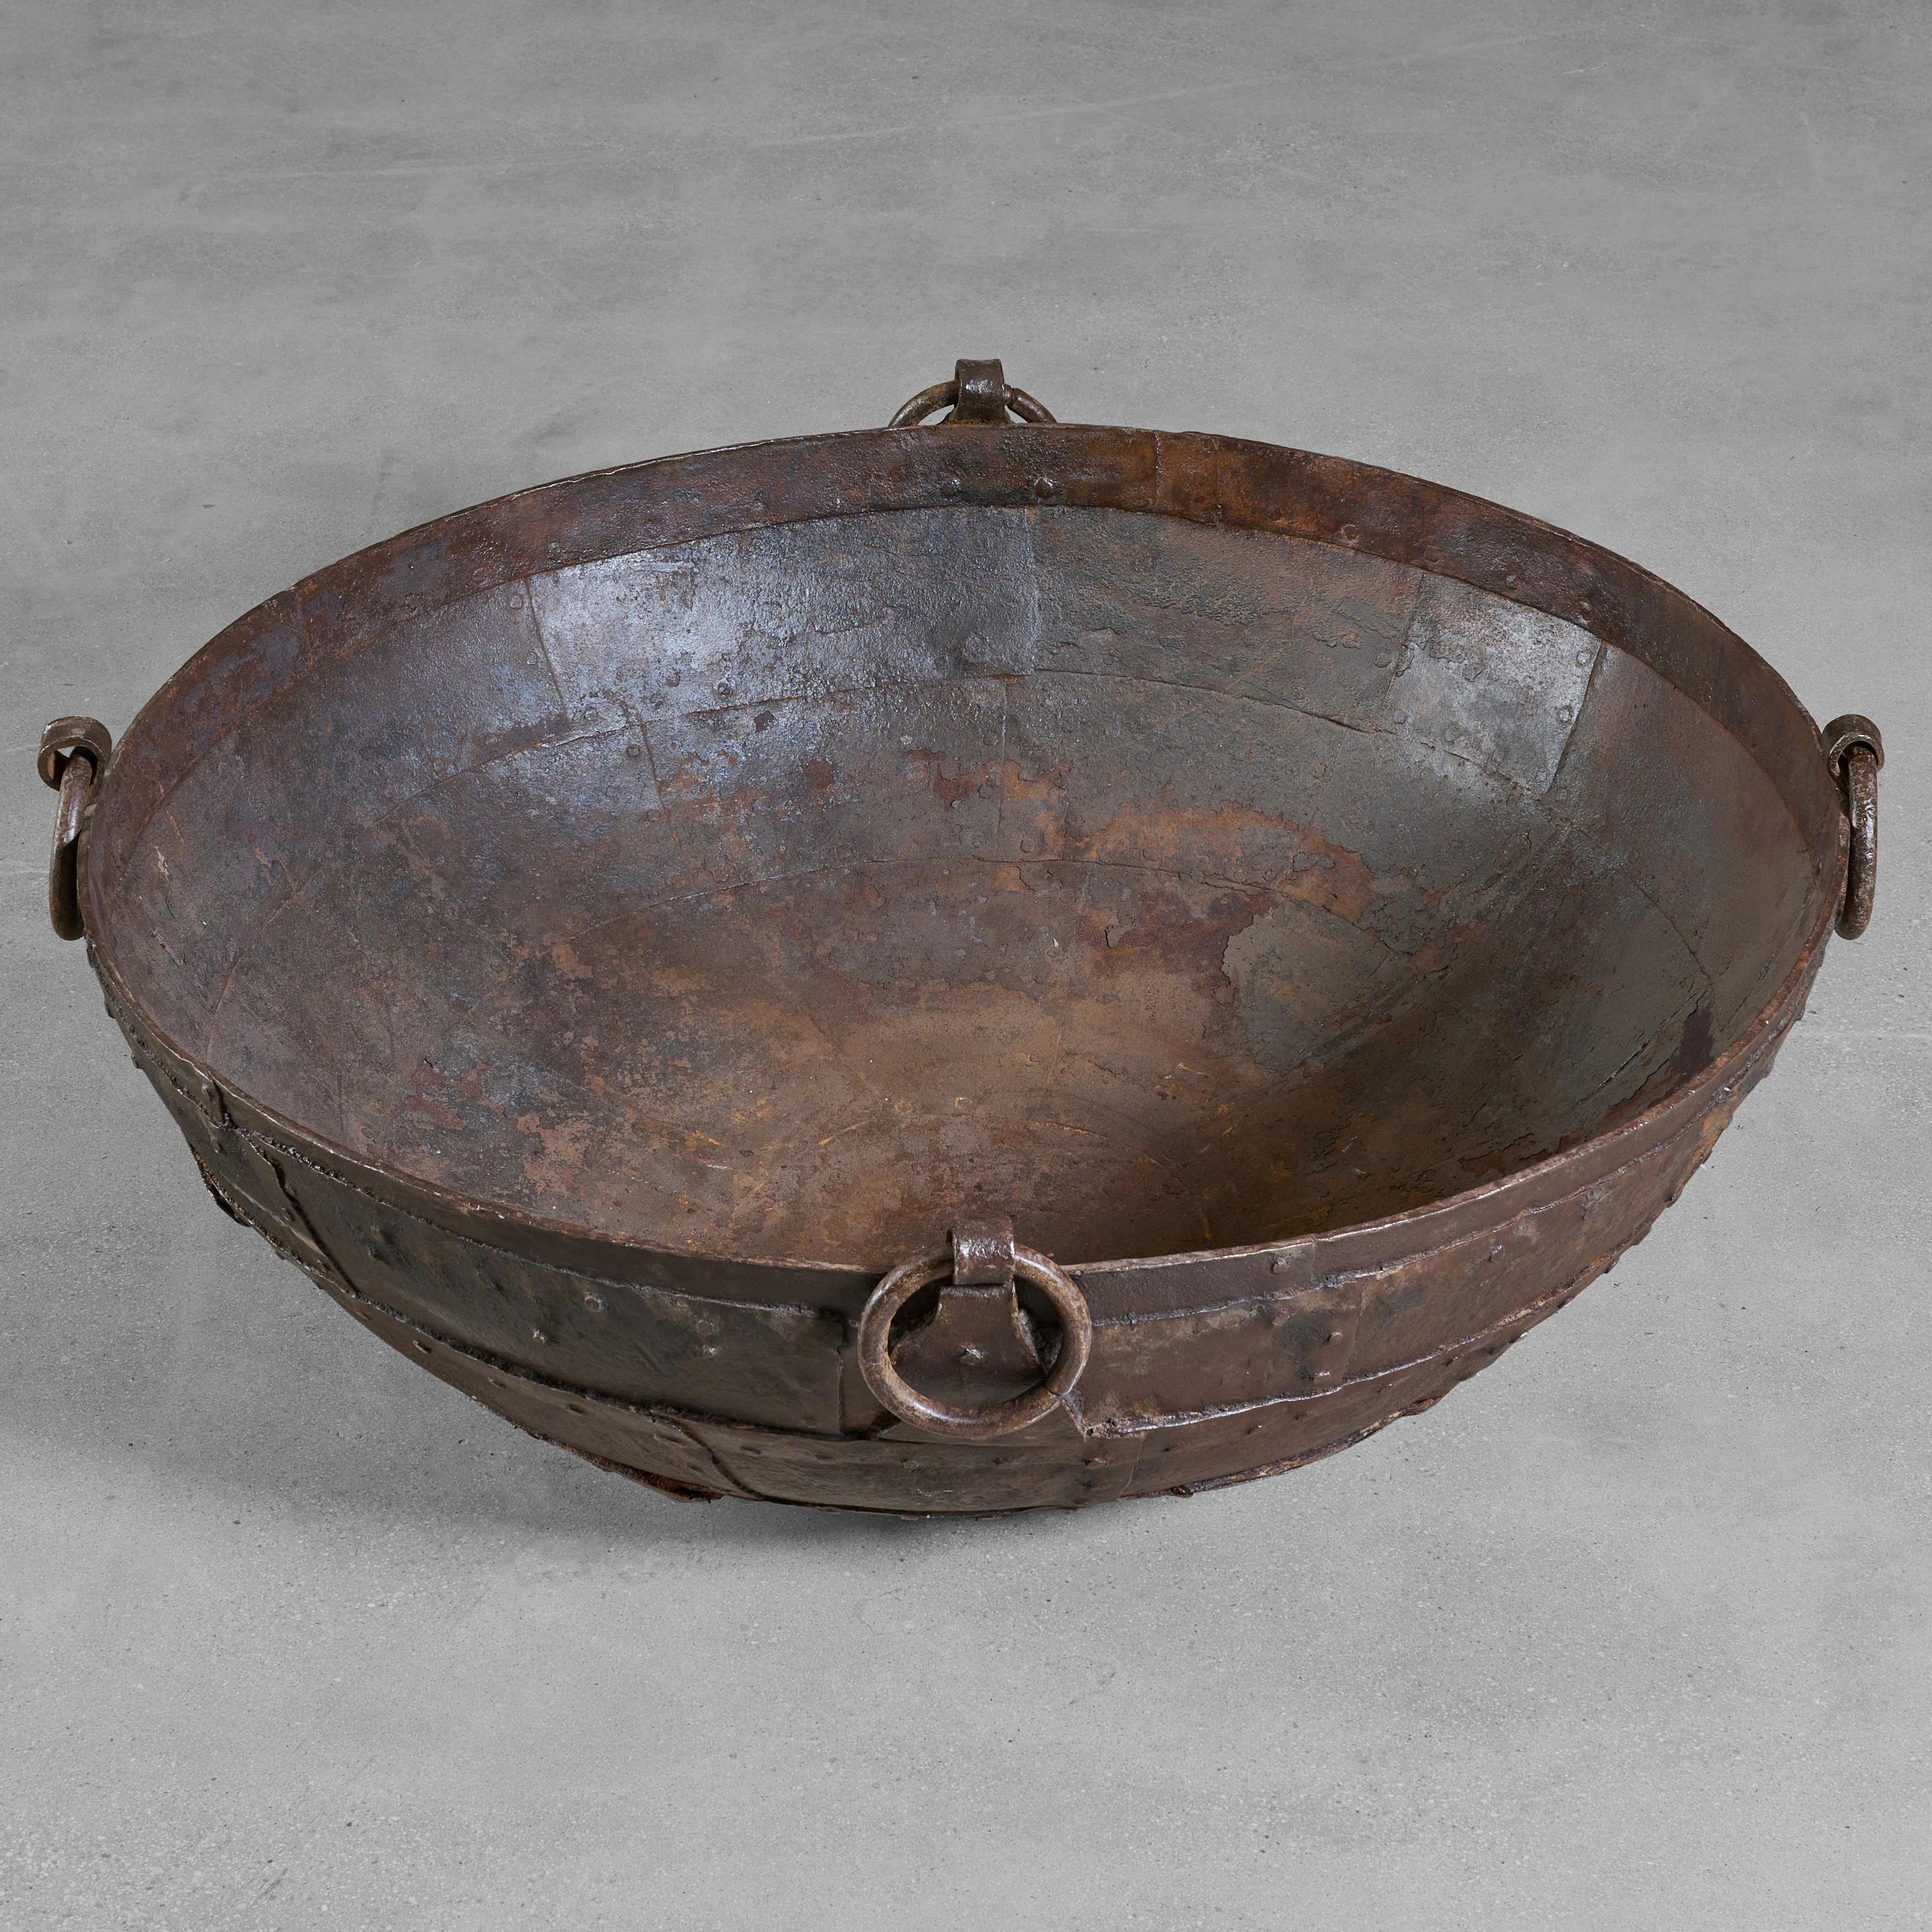 Hammered and riveted Iron vessel used for cooking. With four wonderful handles.